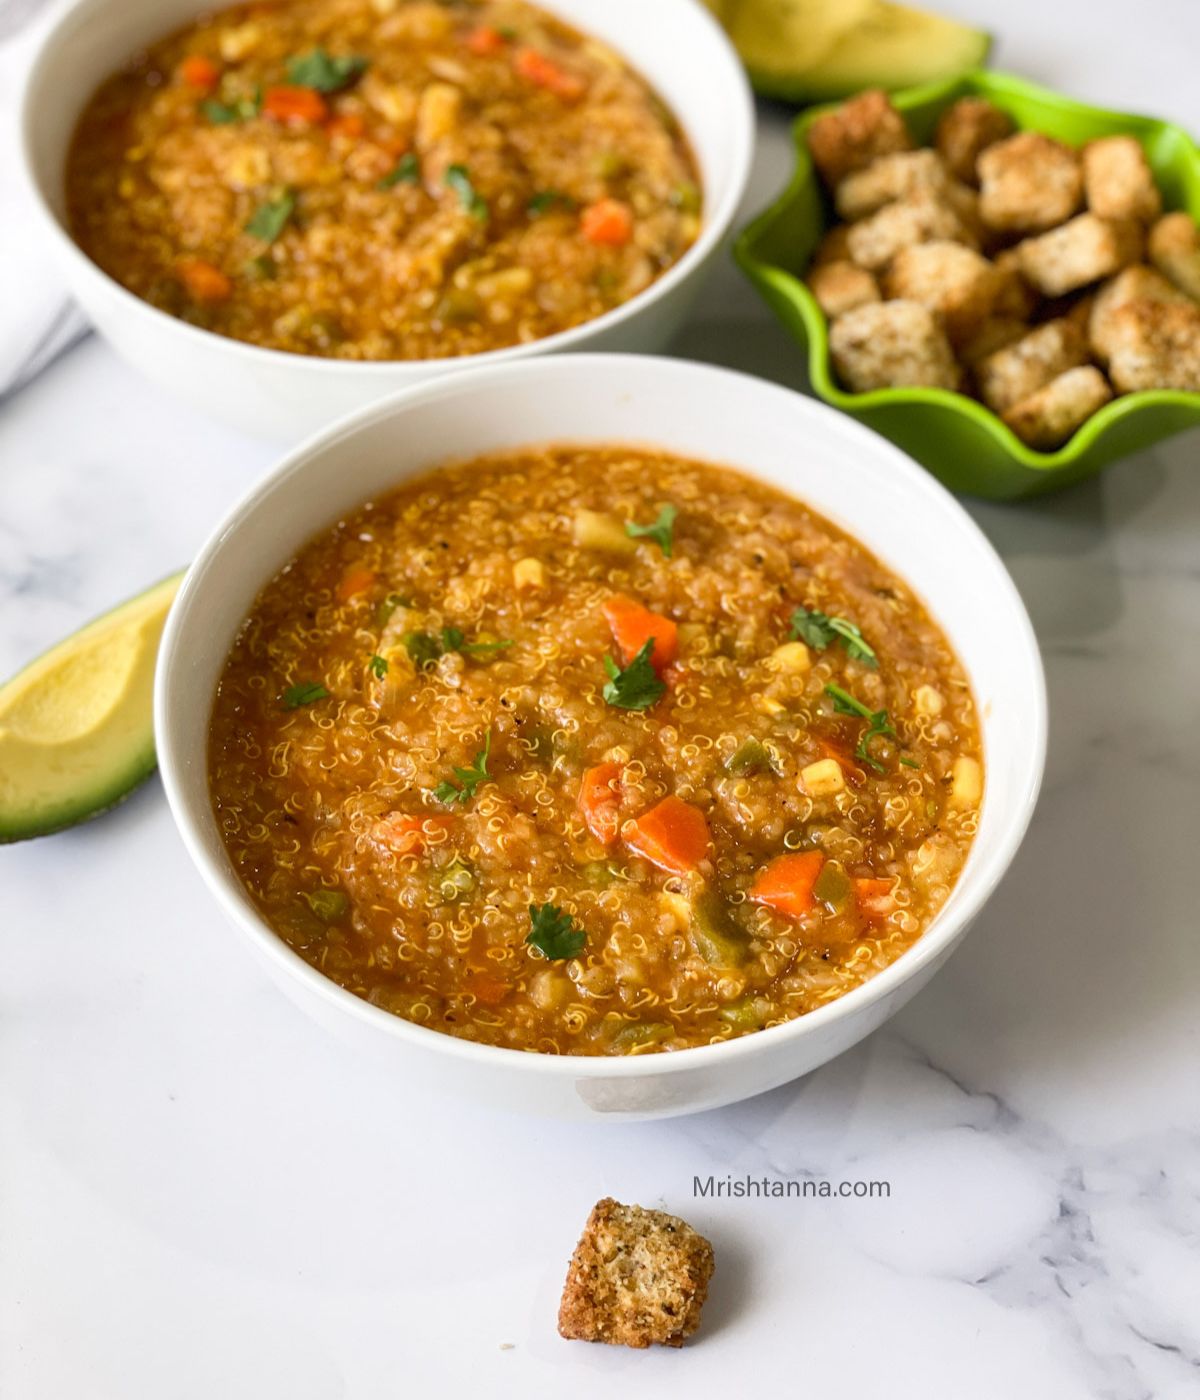 Two bowls of instant pot quinoa vegetable soup are on the table with toppings by the side.